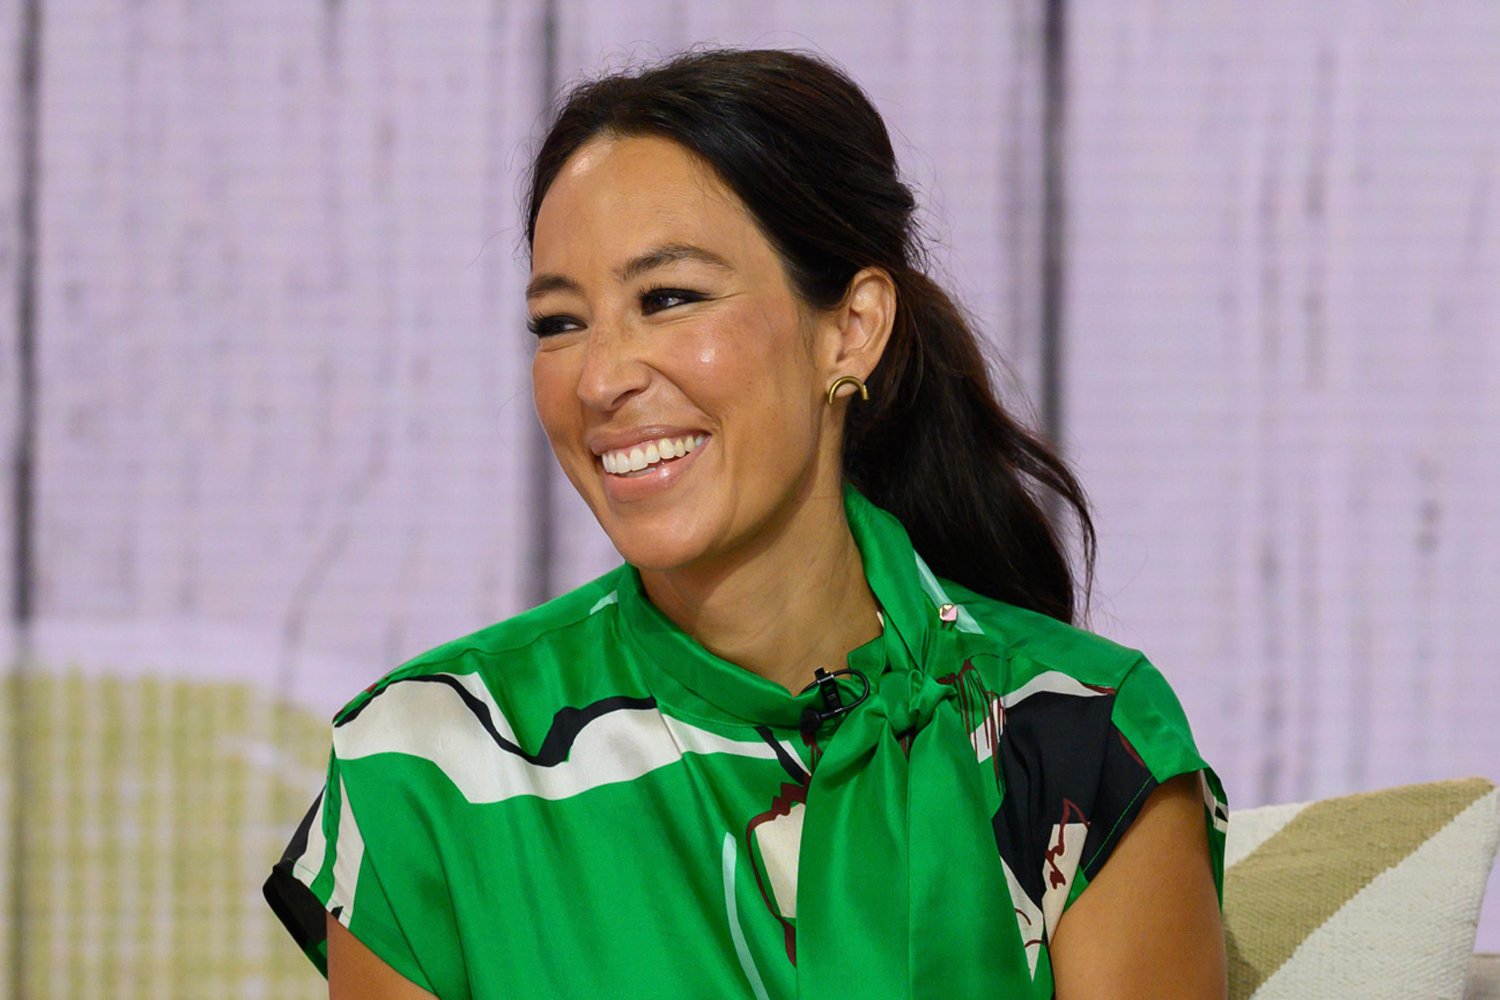 Joanna Gaines laughing and wearing a green top